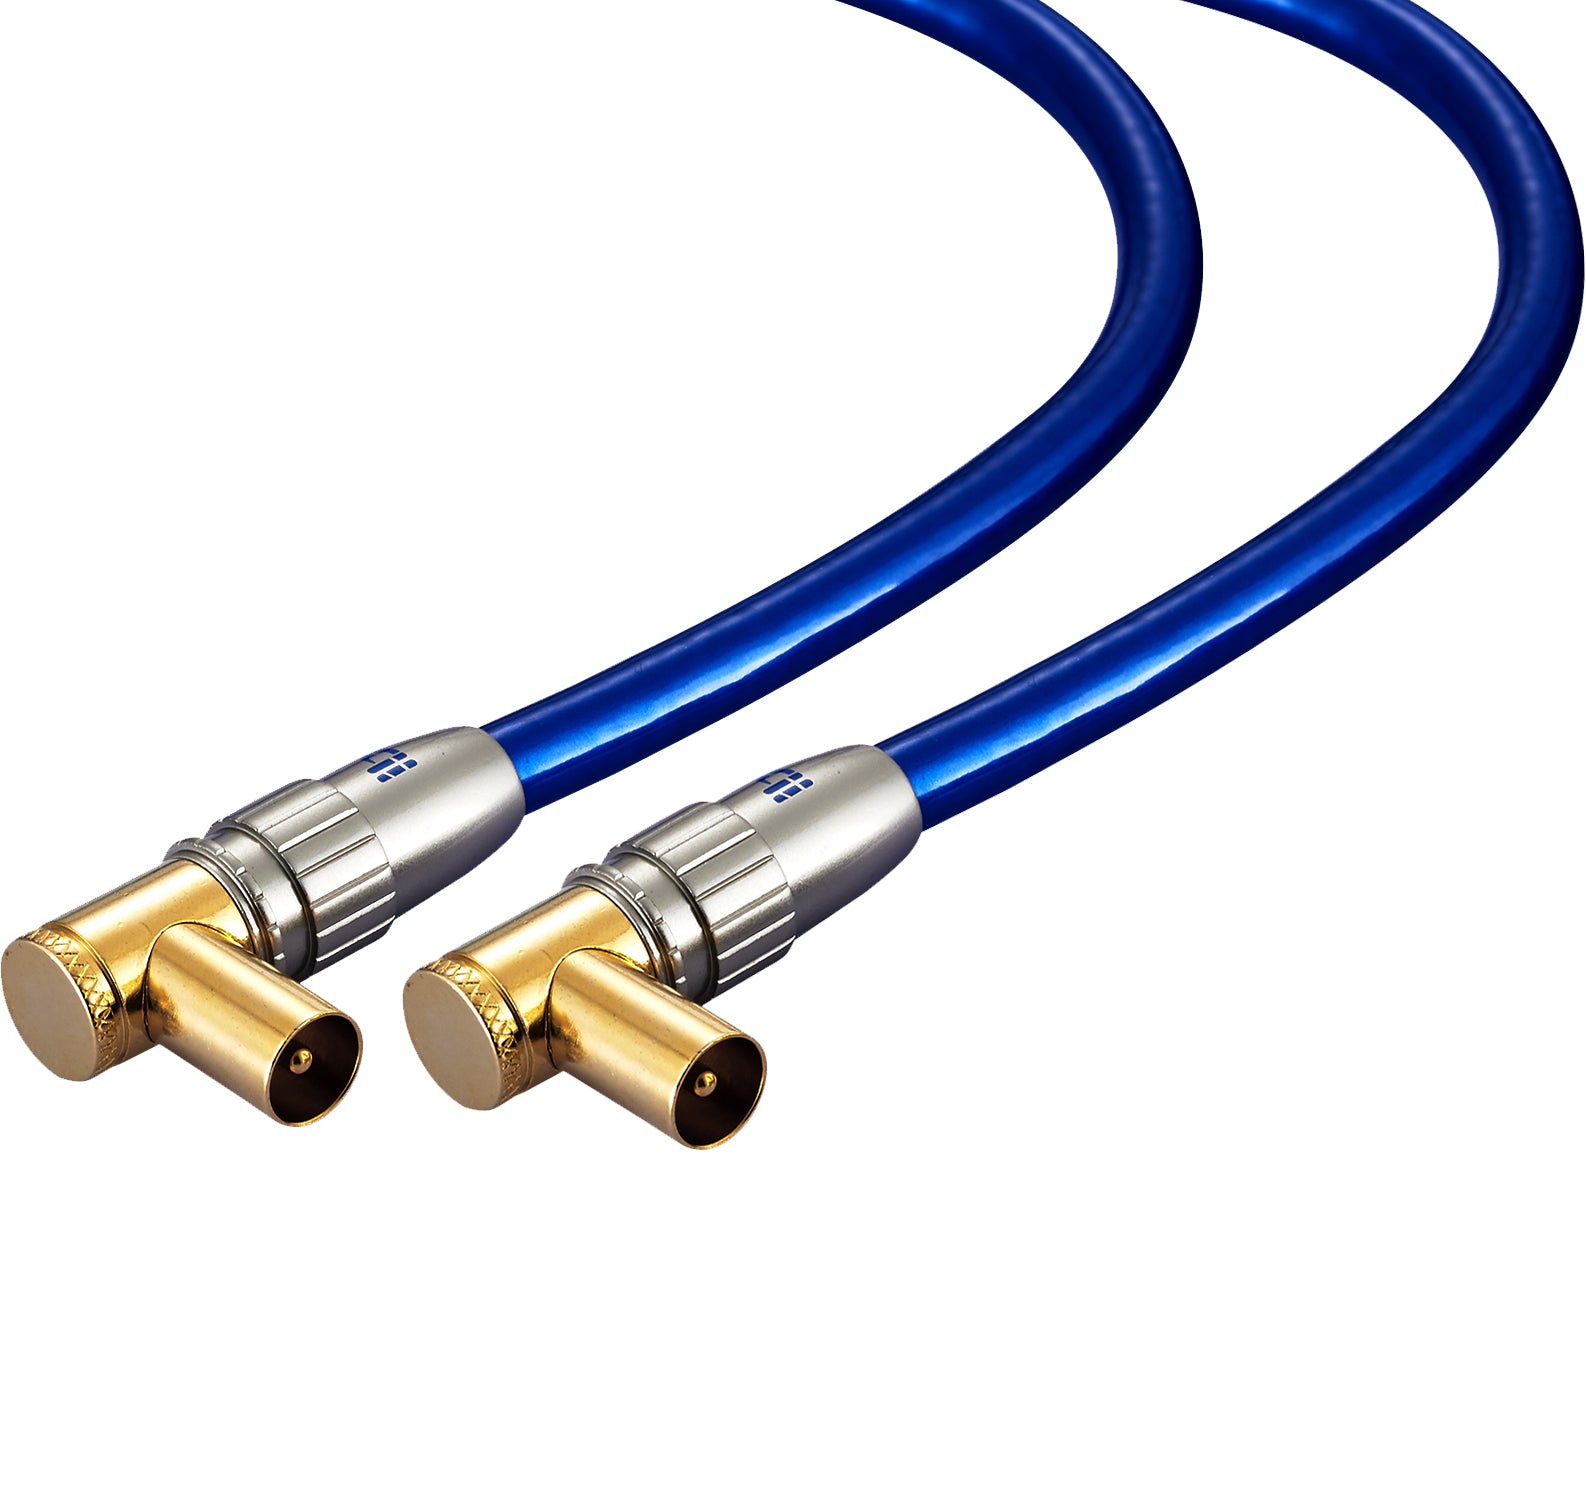 IBRA 2m HDTV Antenna Cable | TV Aerial Cable with 90 Degree Right Angled Connectors | Premium Freeview Coaxial Cable | 90° Angled Connectors: Coax Male to Male | For UHV/UHF/RF DVB-T1/T2